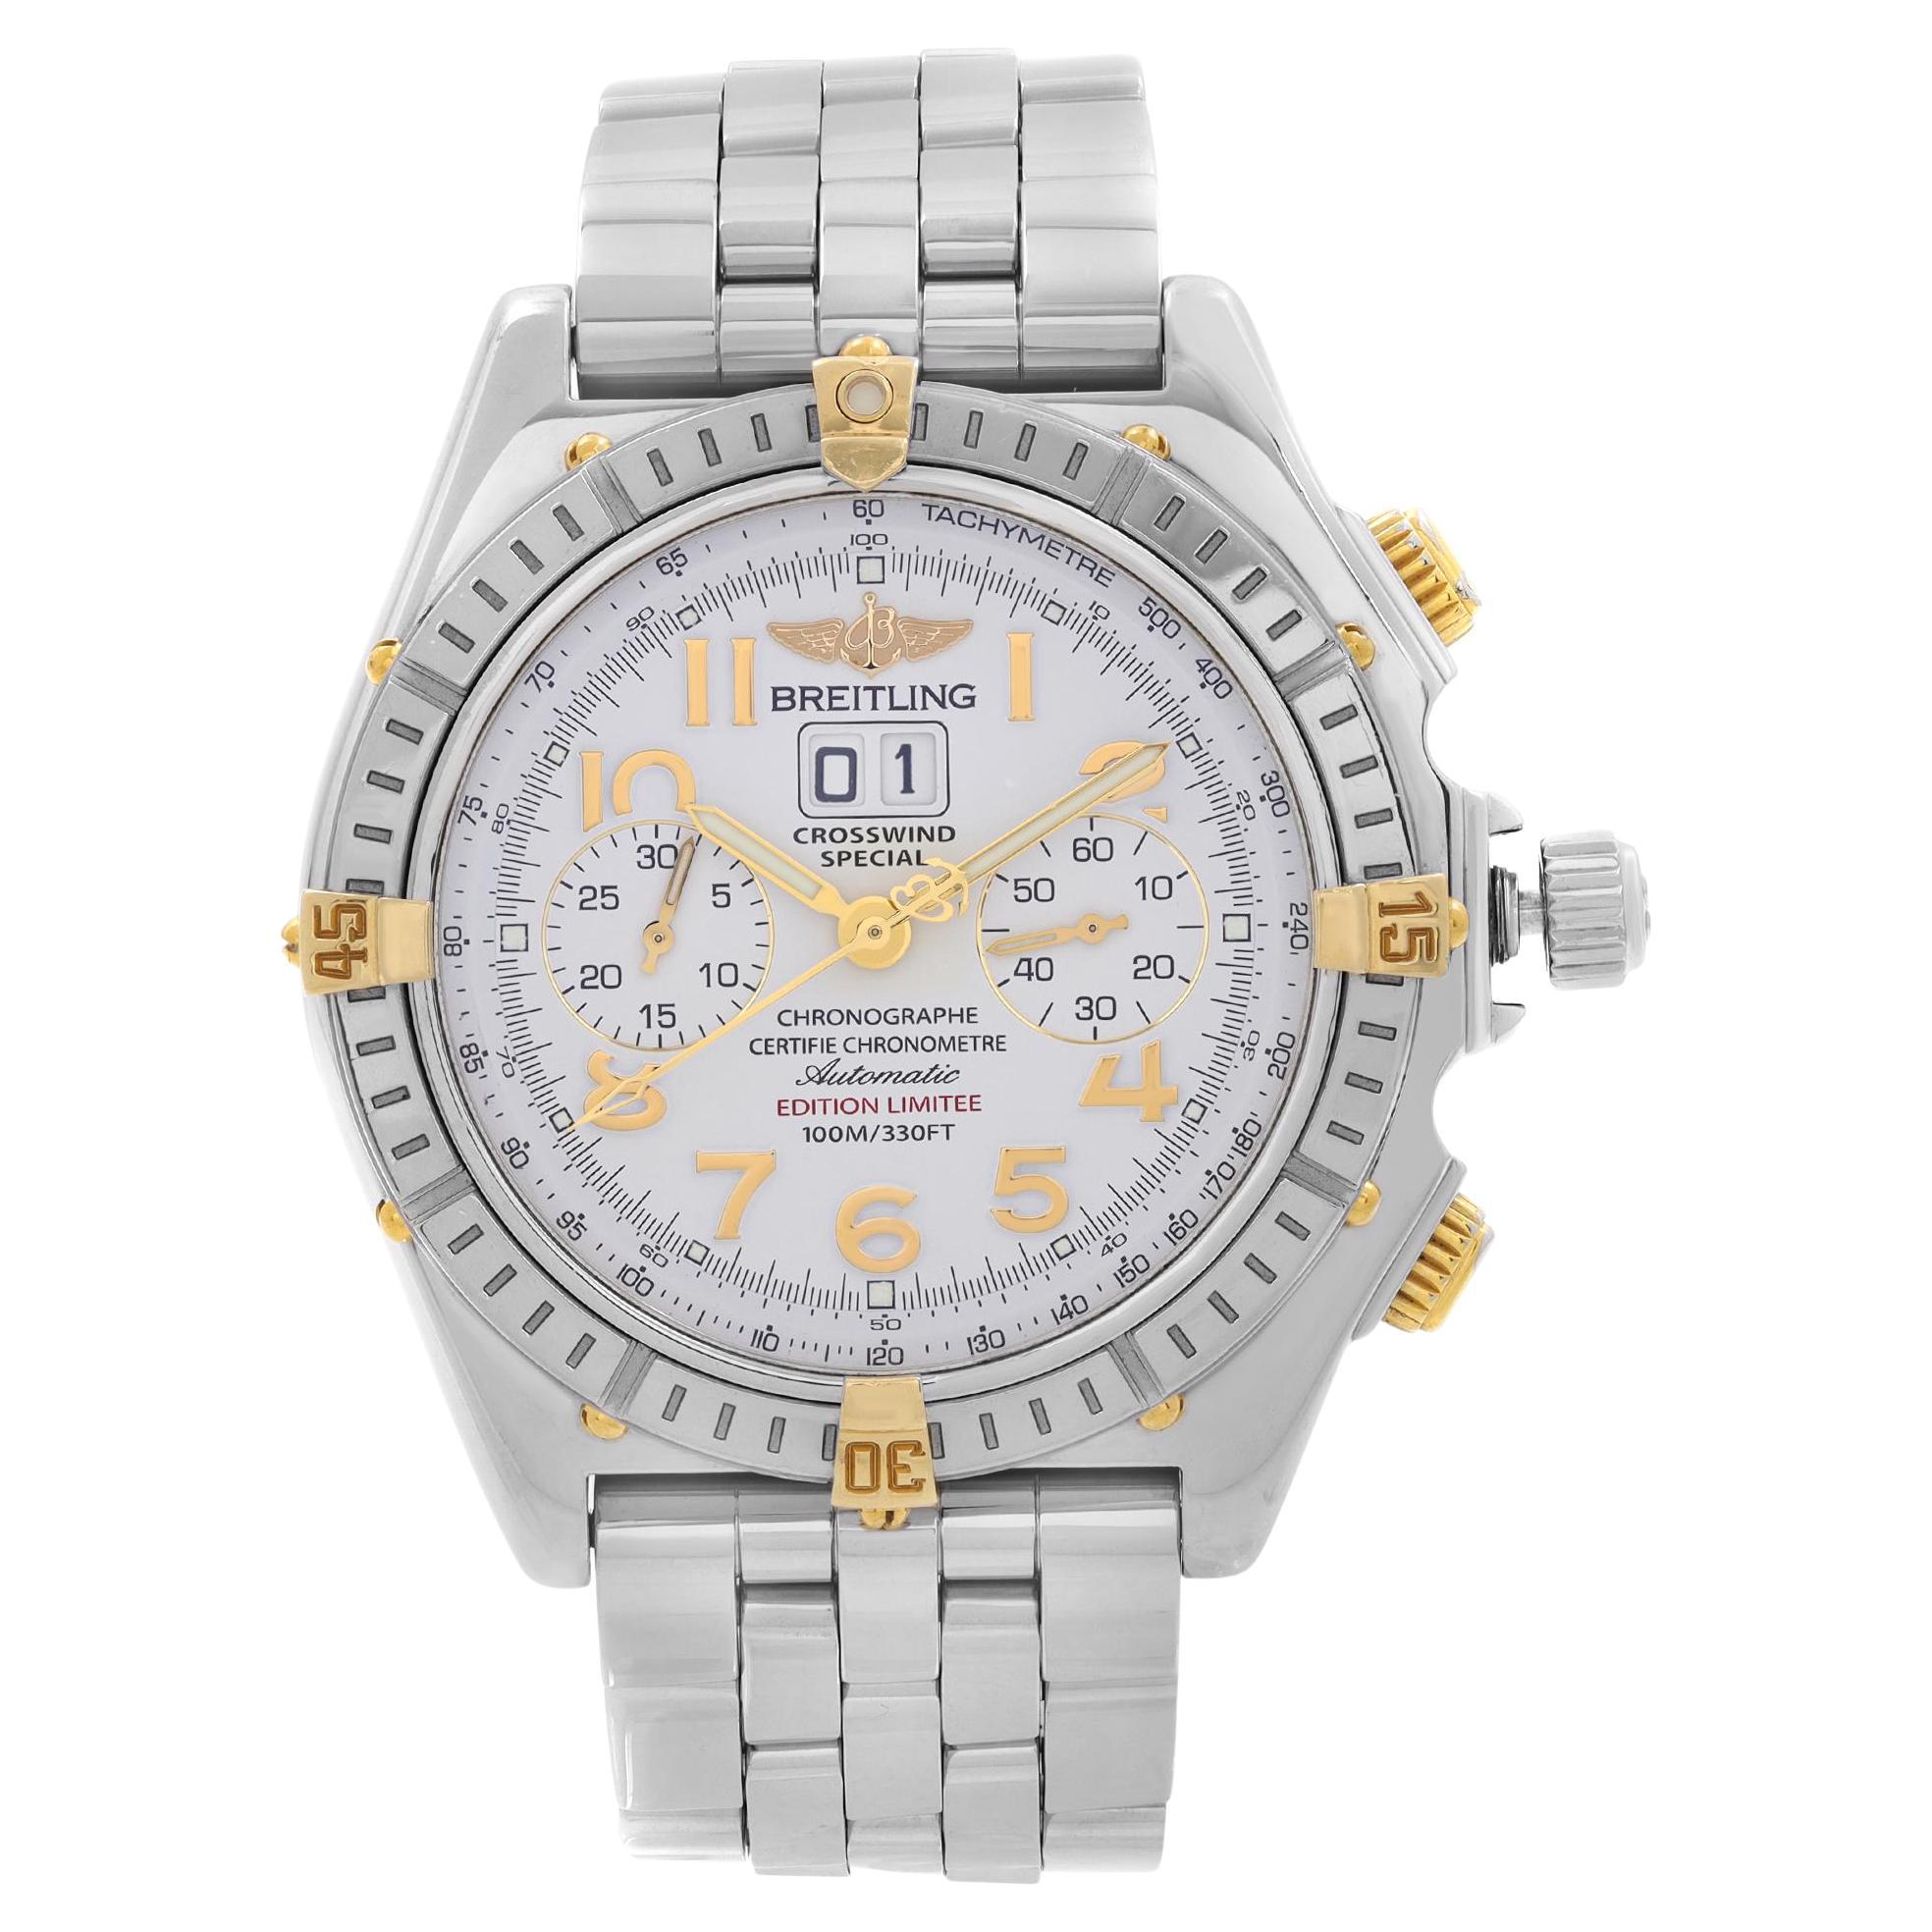 Breitling Crosswind Limited Steel White Dial Automatic Watch B44356